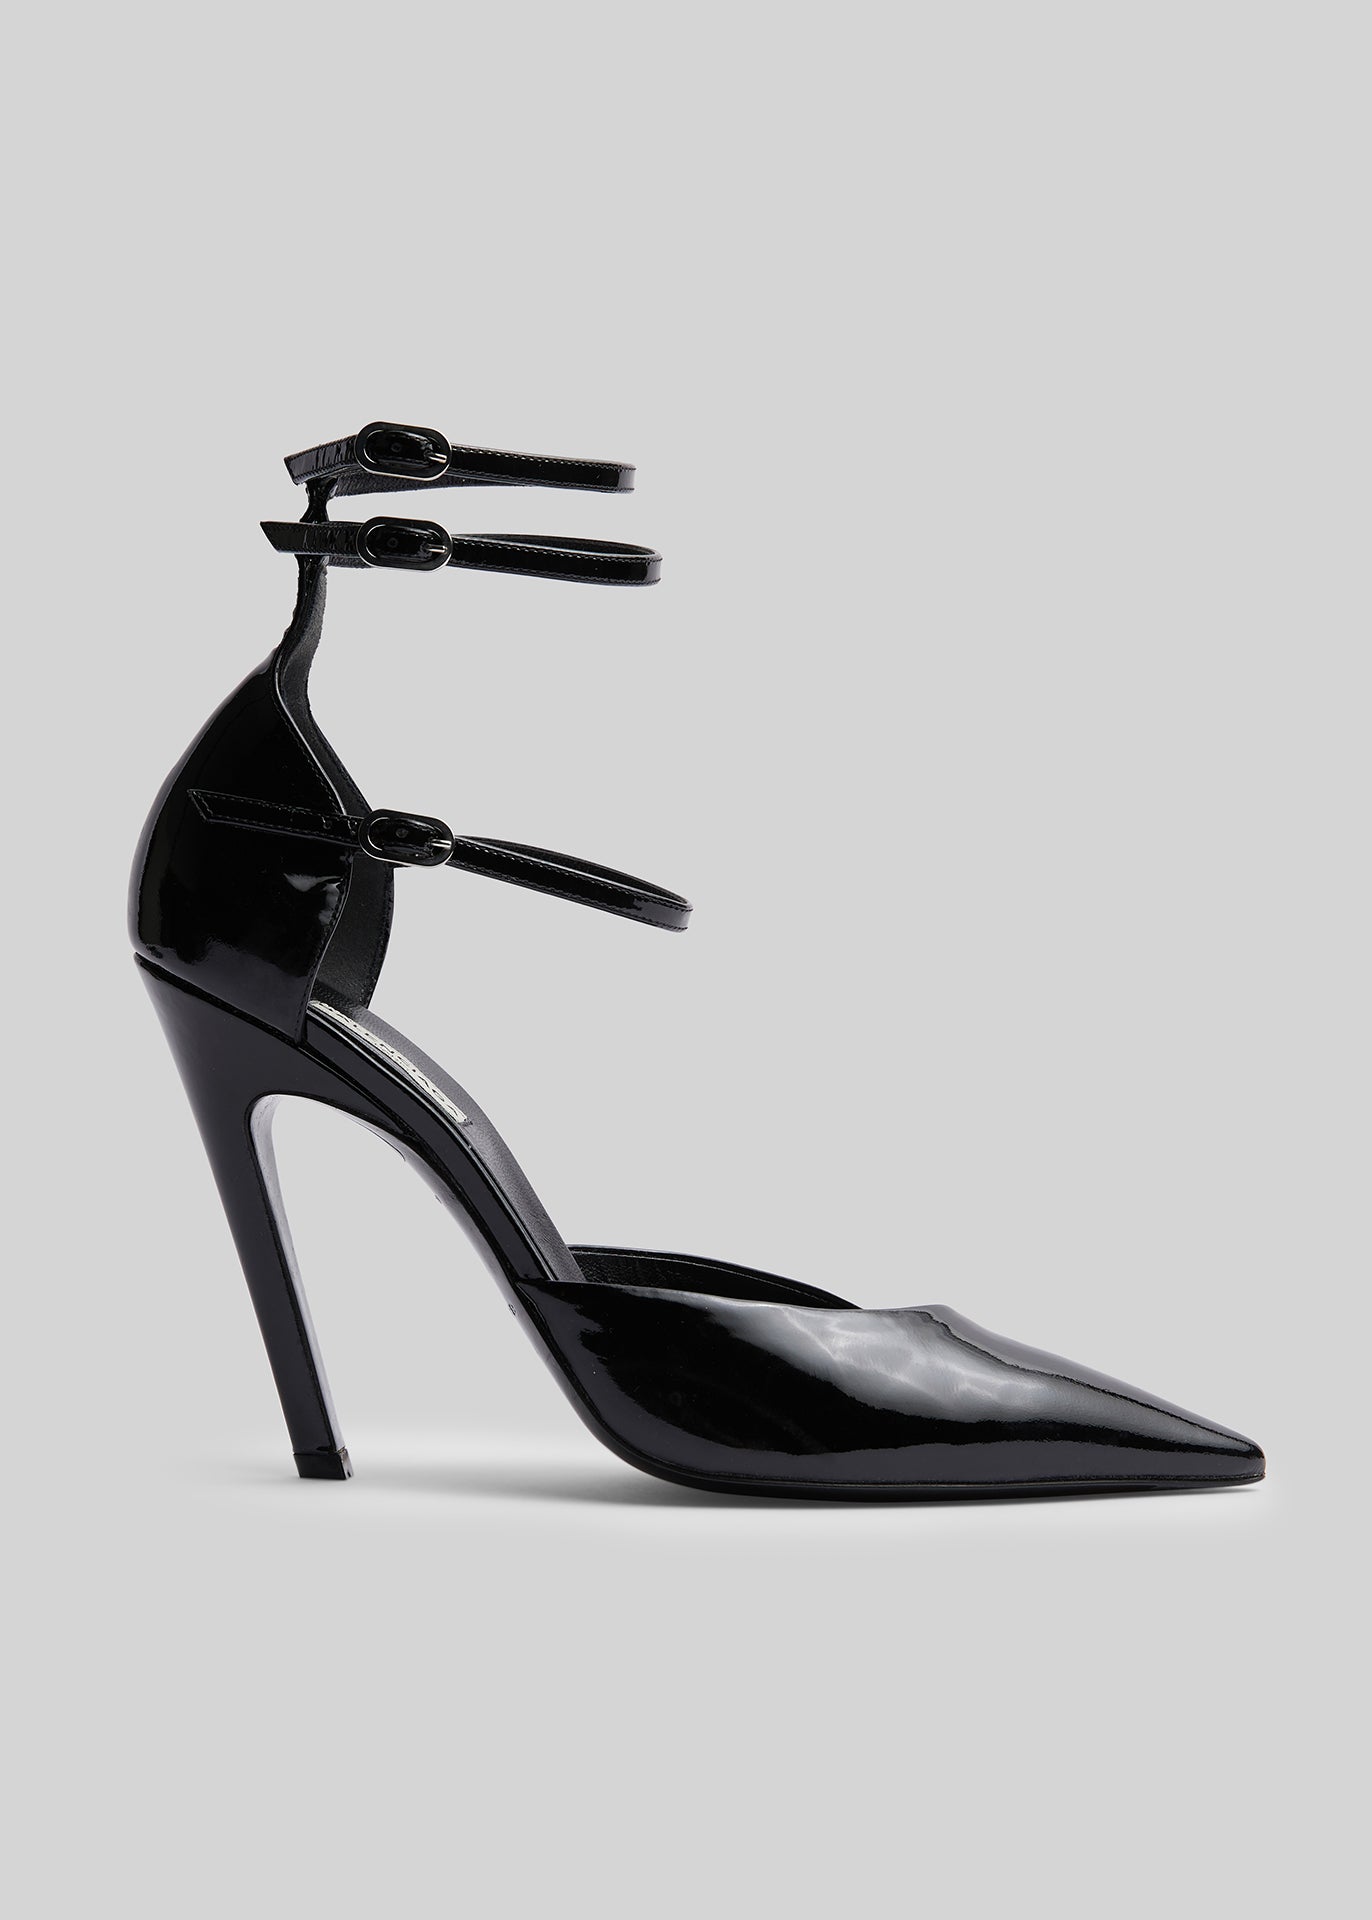 The Best Balenciaga Shoes Of 2020 Shop Now  Editorialist